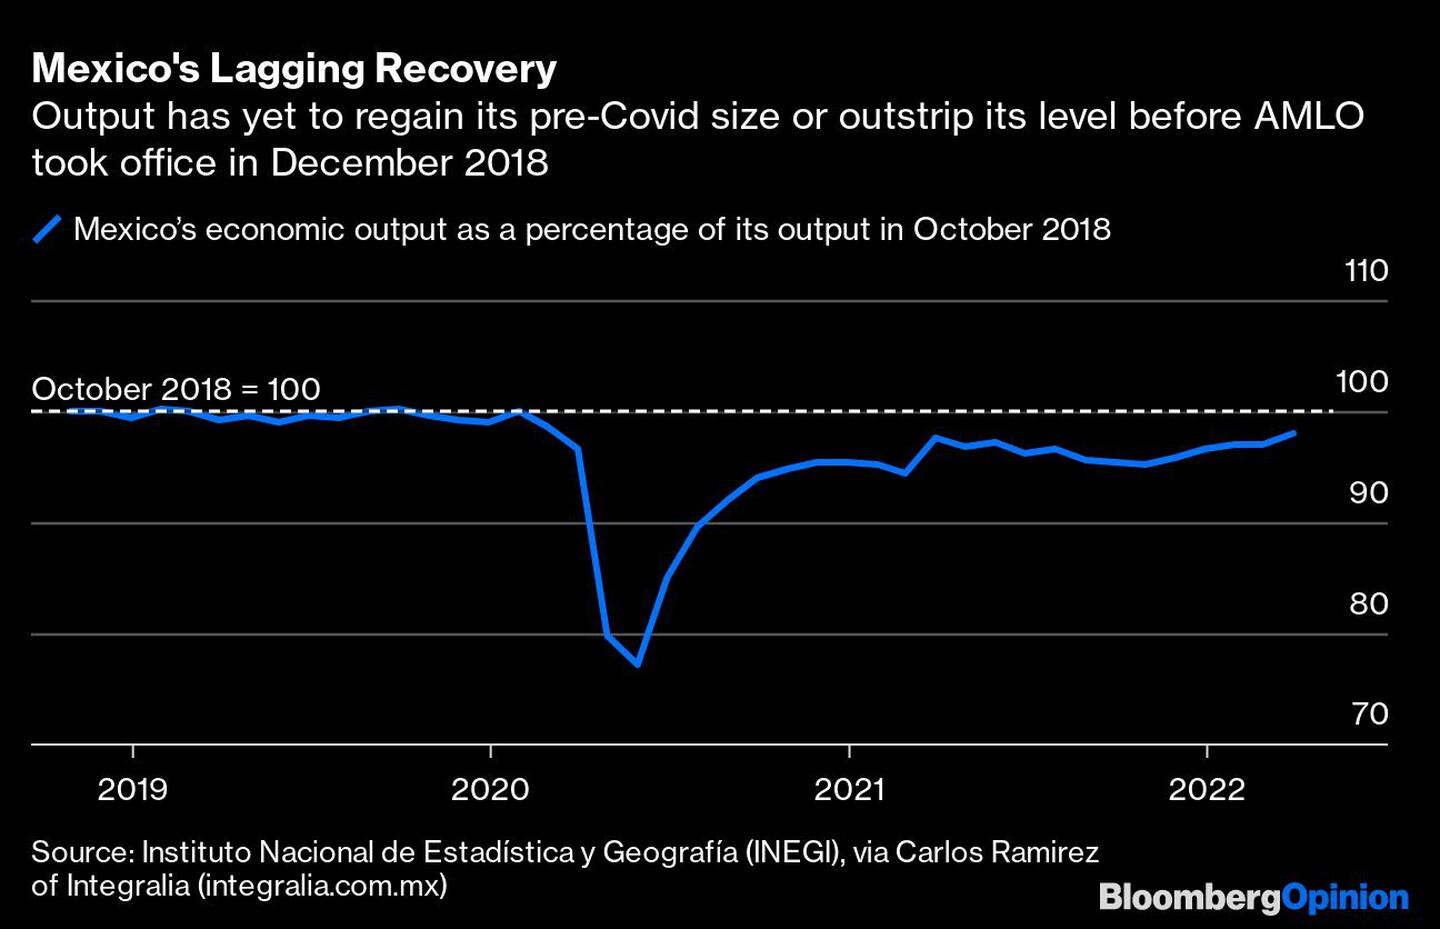 Mexico's Lagging Recovery | Output has yet to regain its pre-Covid size or outstrip its level before AMLO took office in December 2018dfd